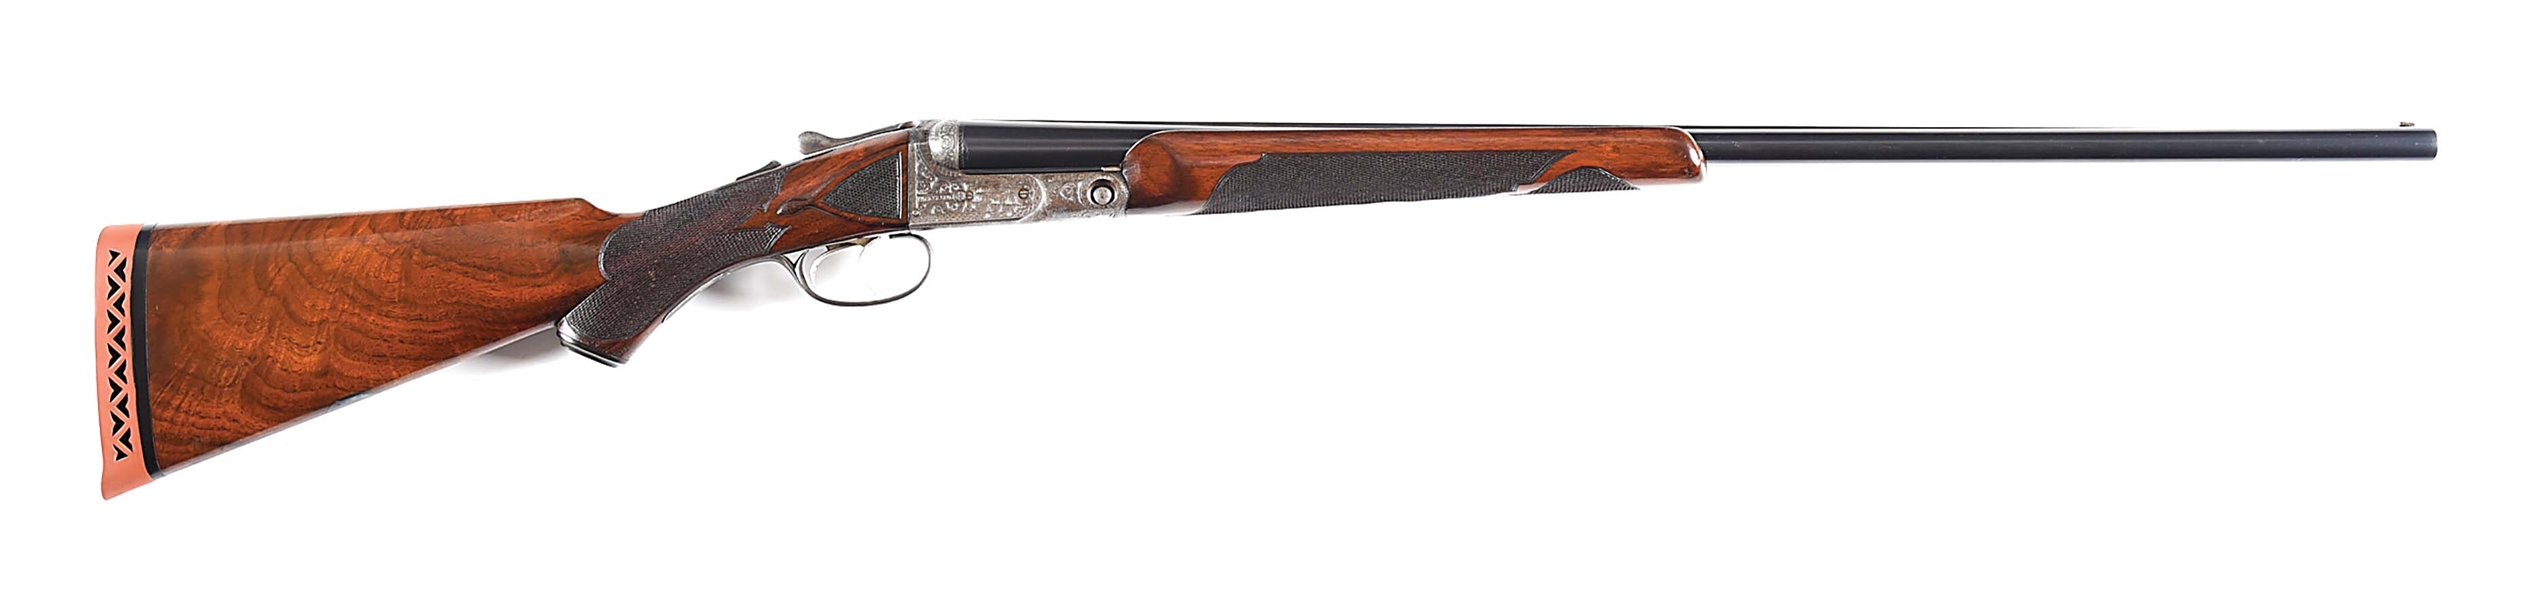 (C) PARKER BROTHERS CHE 20 BORE SIDE BY SIDE SHOTGUN.